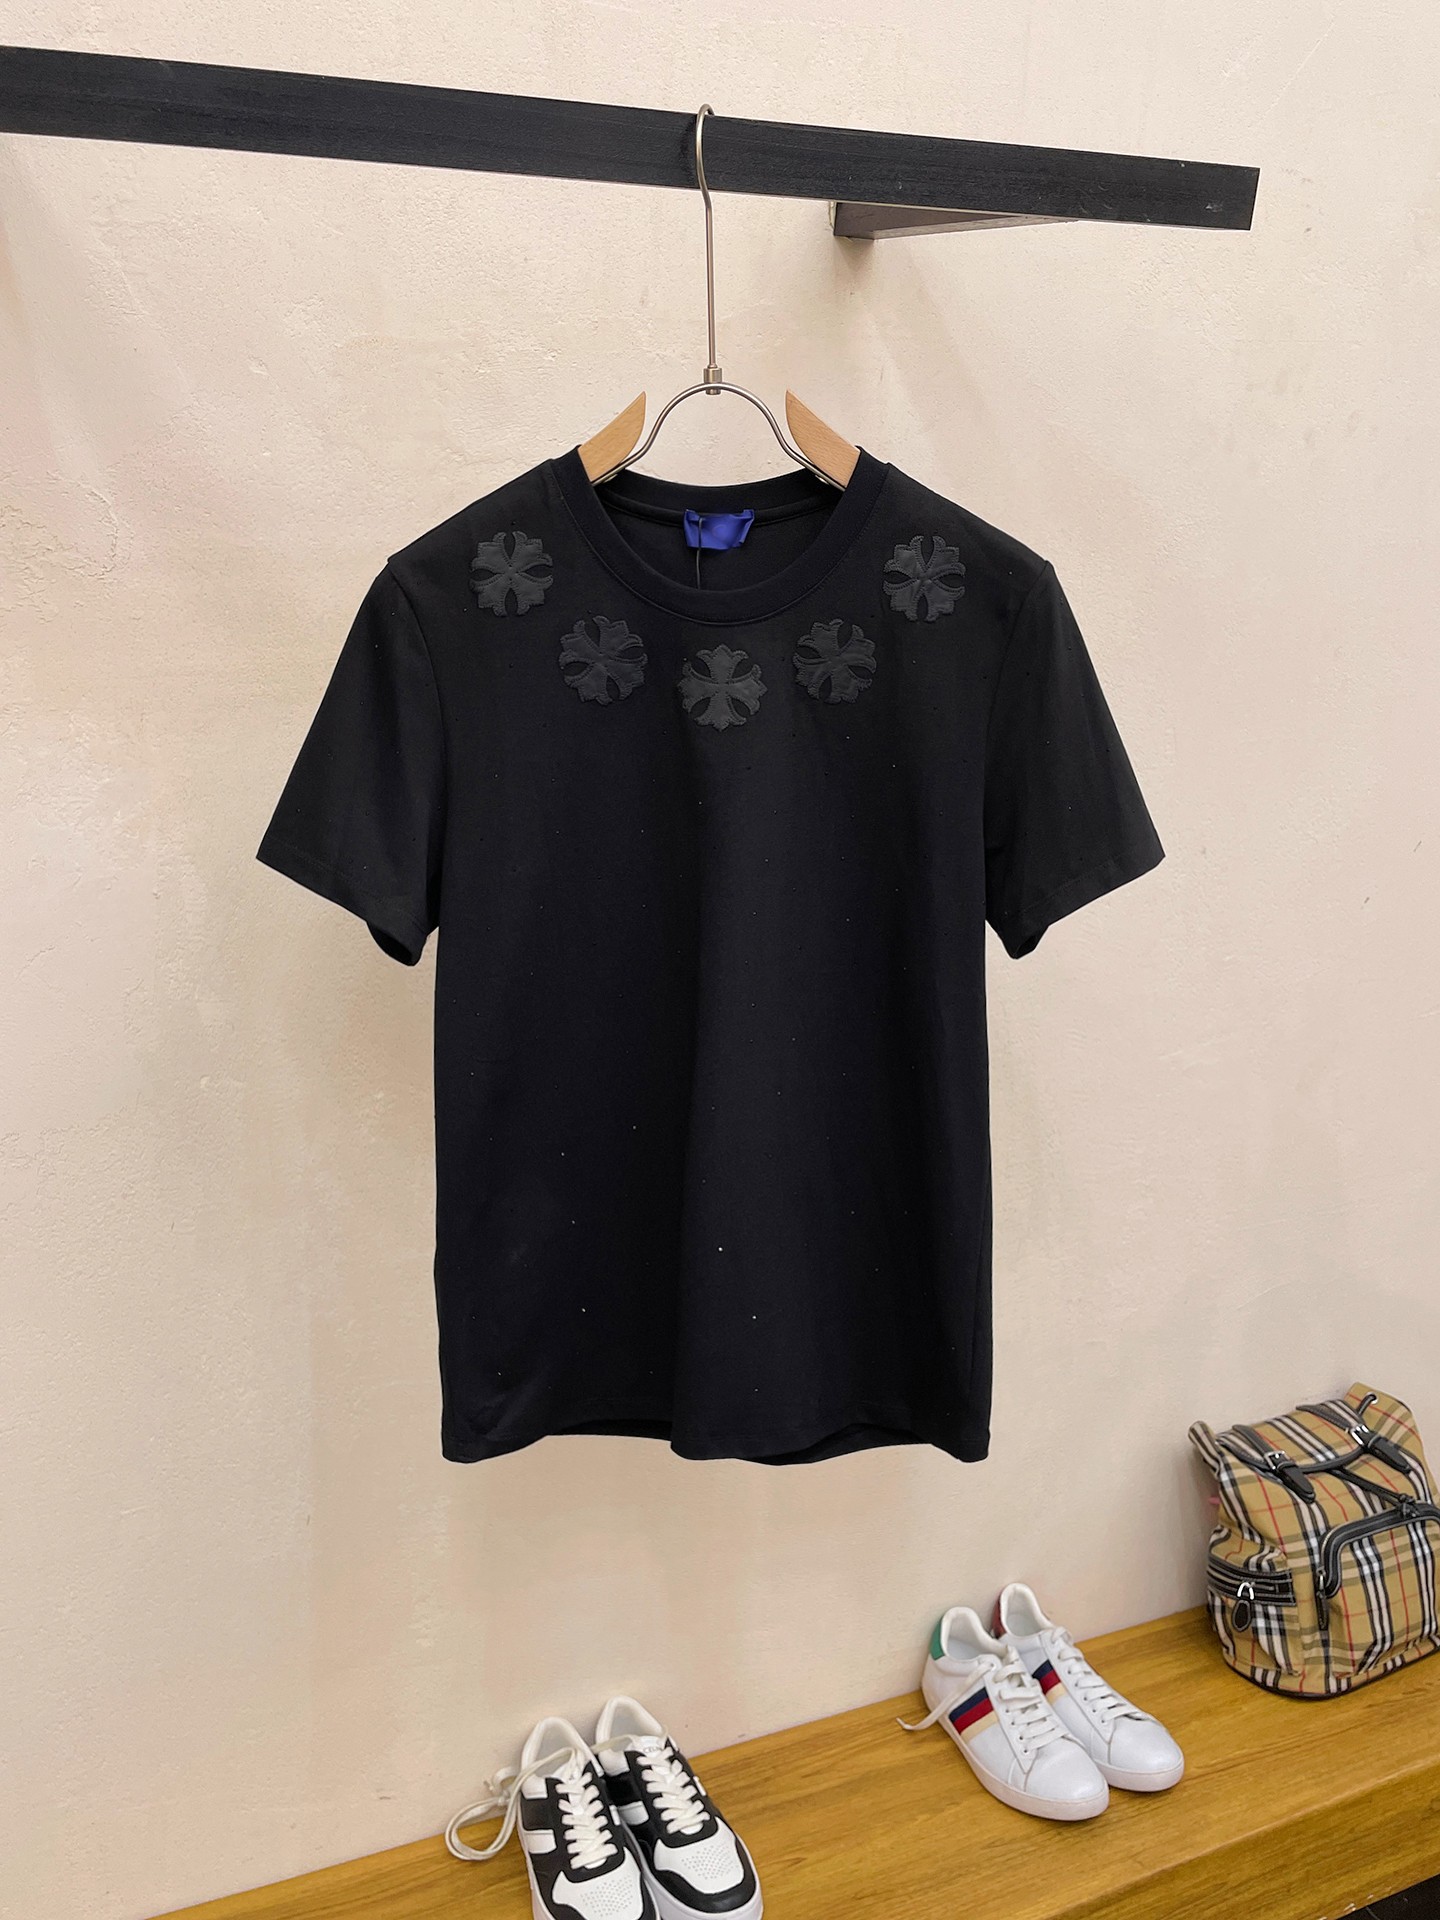 Chrome Hearts Clothing T-Shirt Men Cotton Mercerized Spring/Summer Collection Fashion Short Sleeve